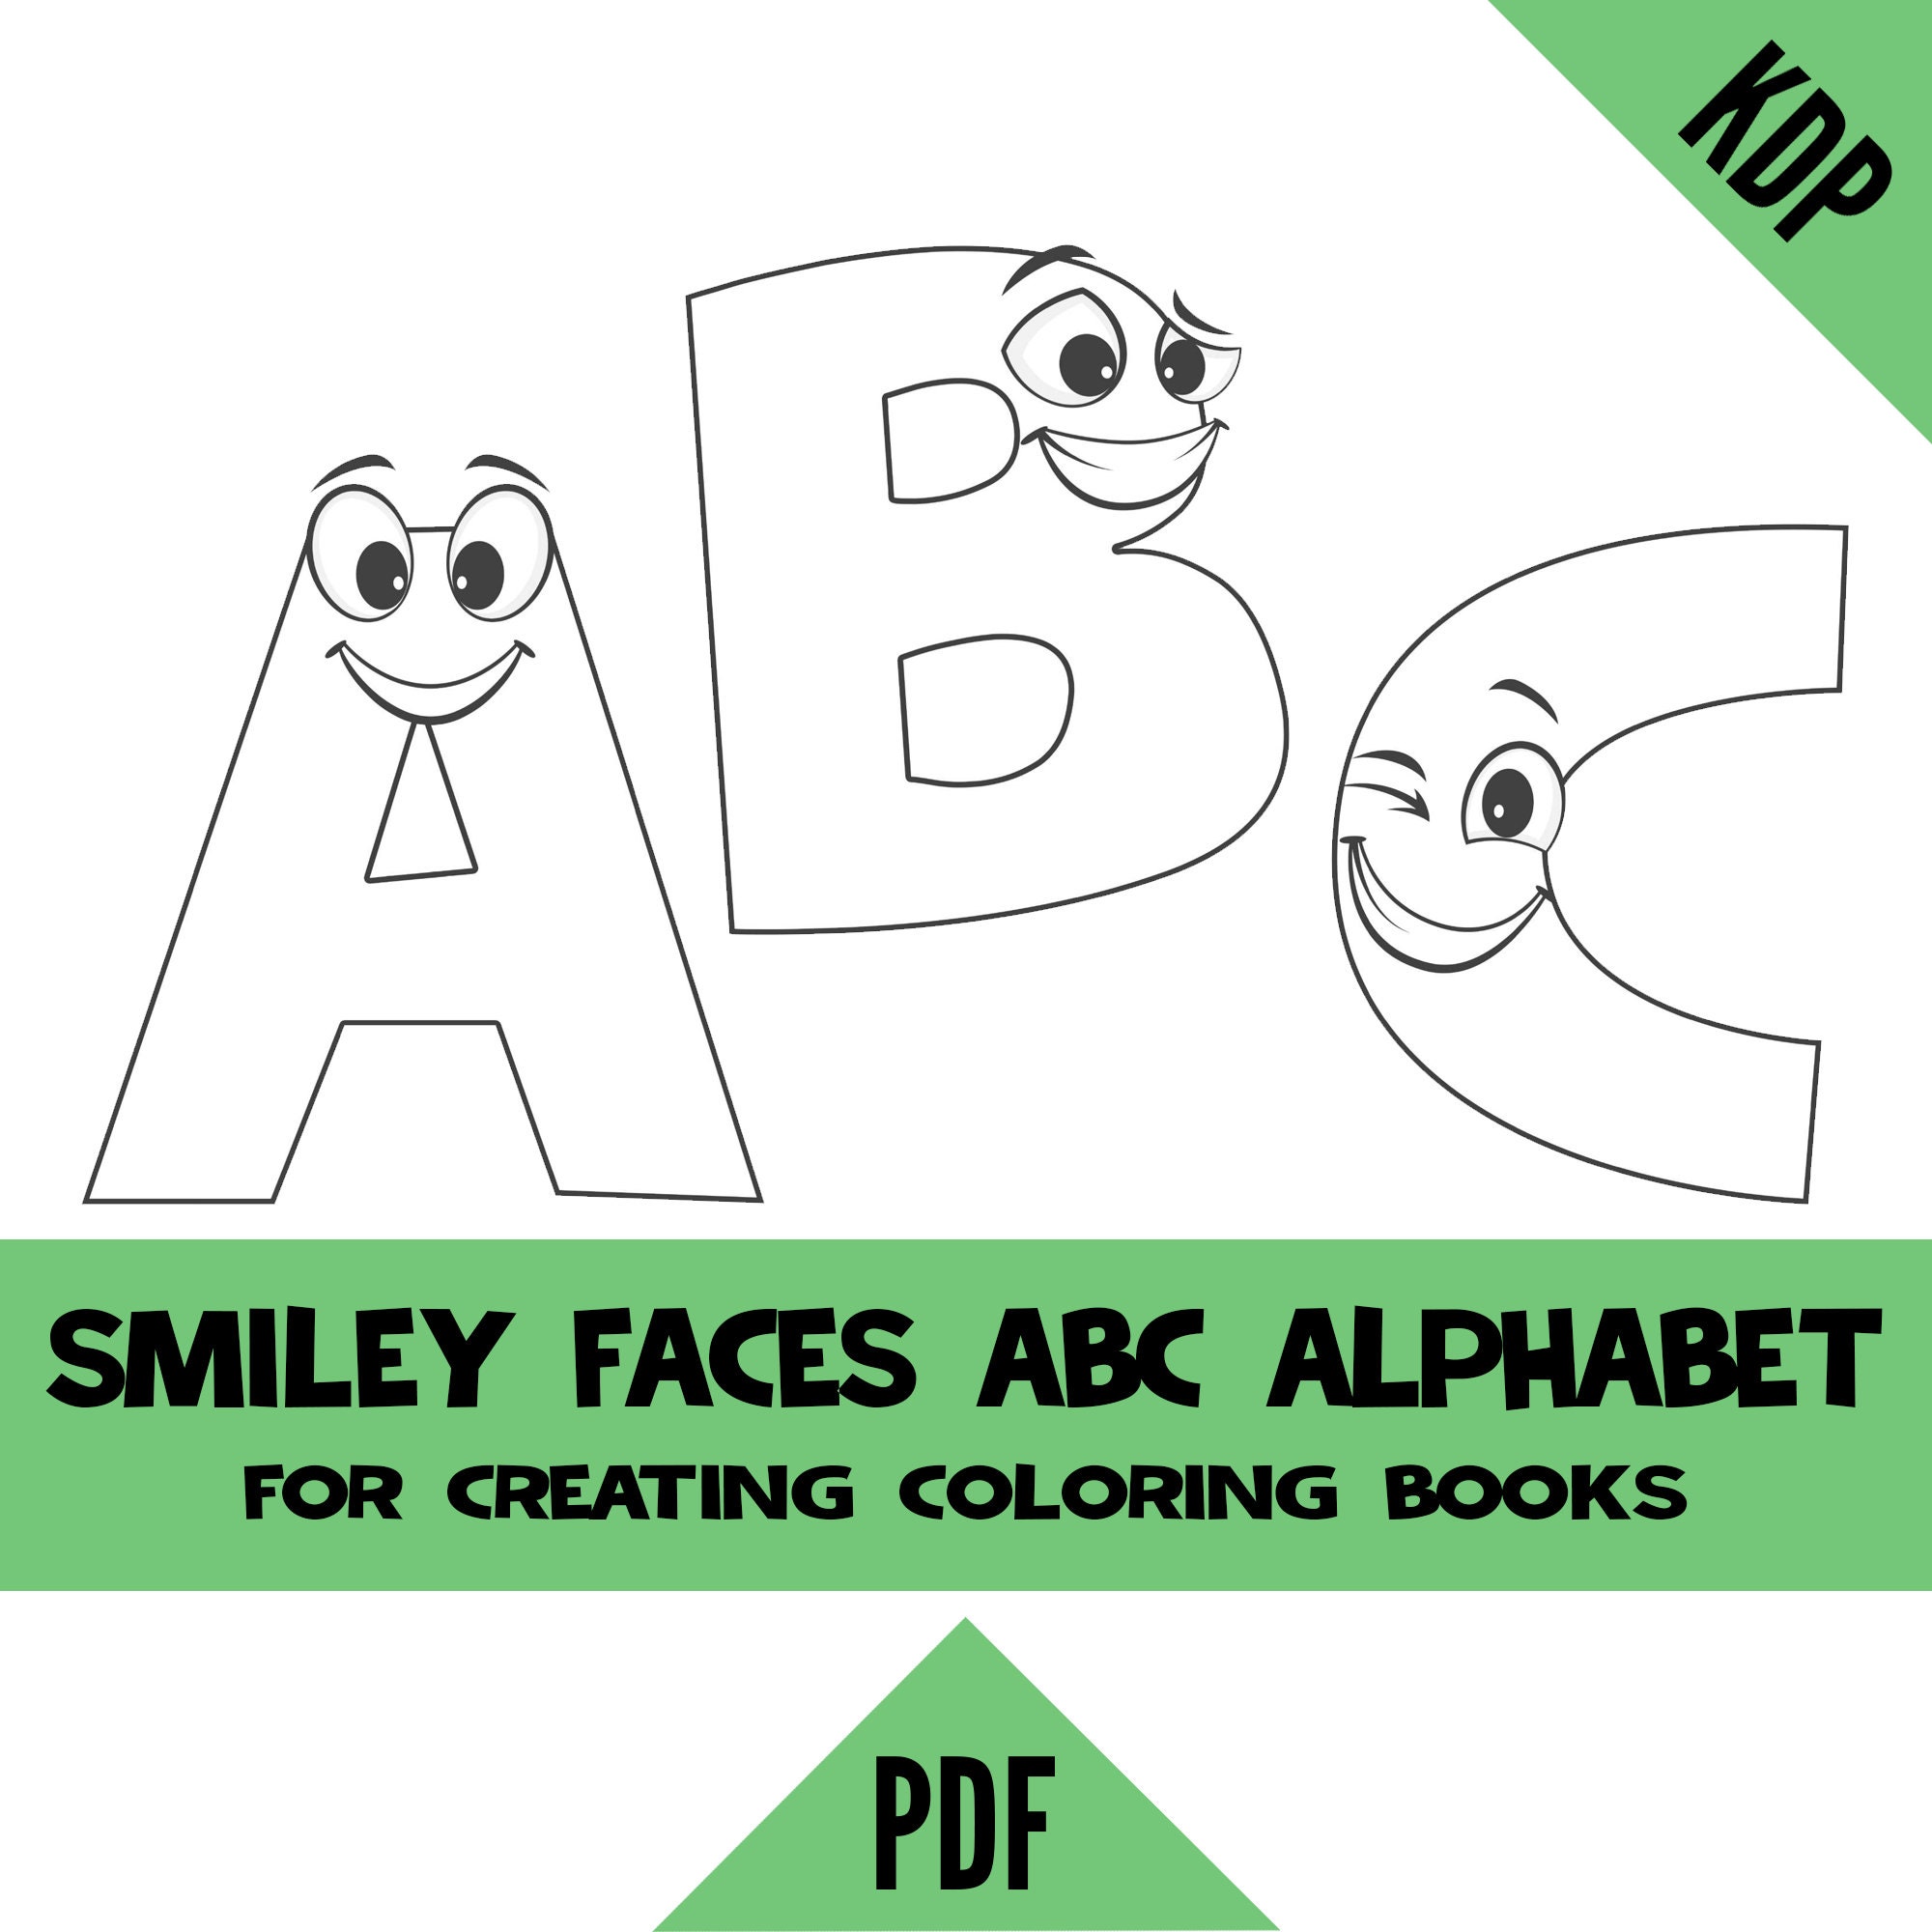 Kdp smile face alphabet coloring pages sheets pdf abc letters colouring pages for creating a to z coloring books download now